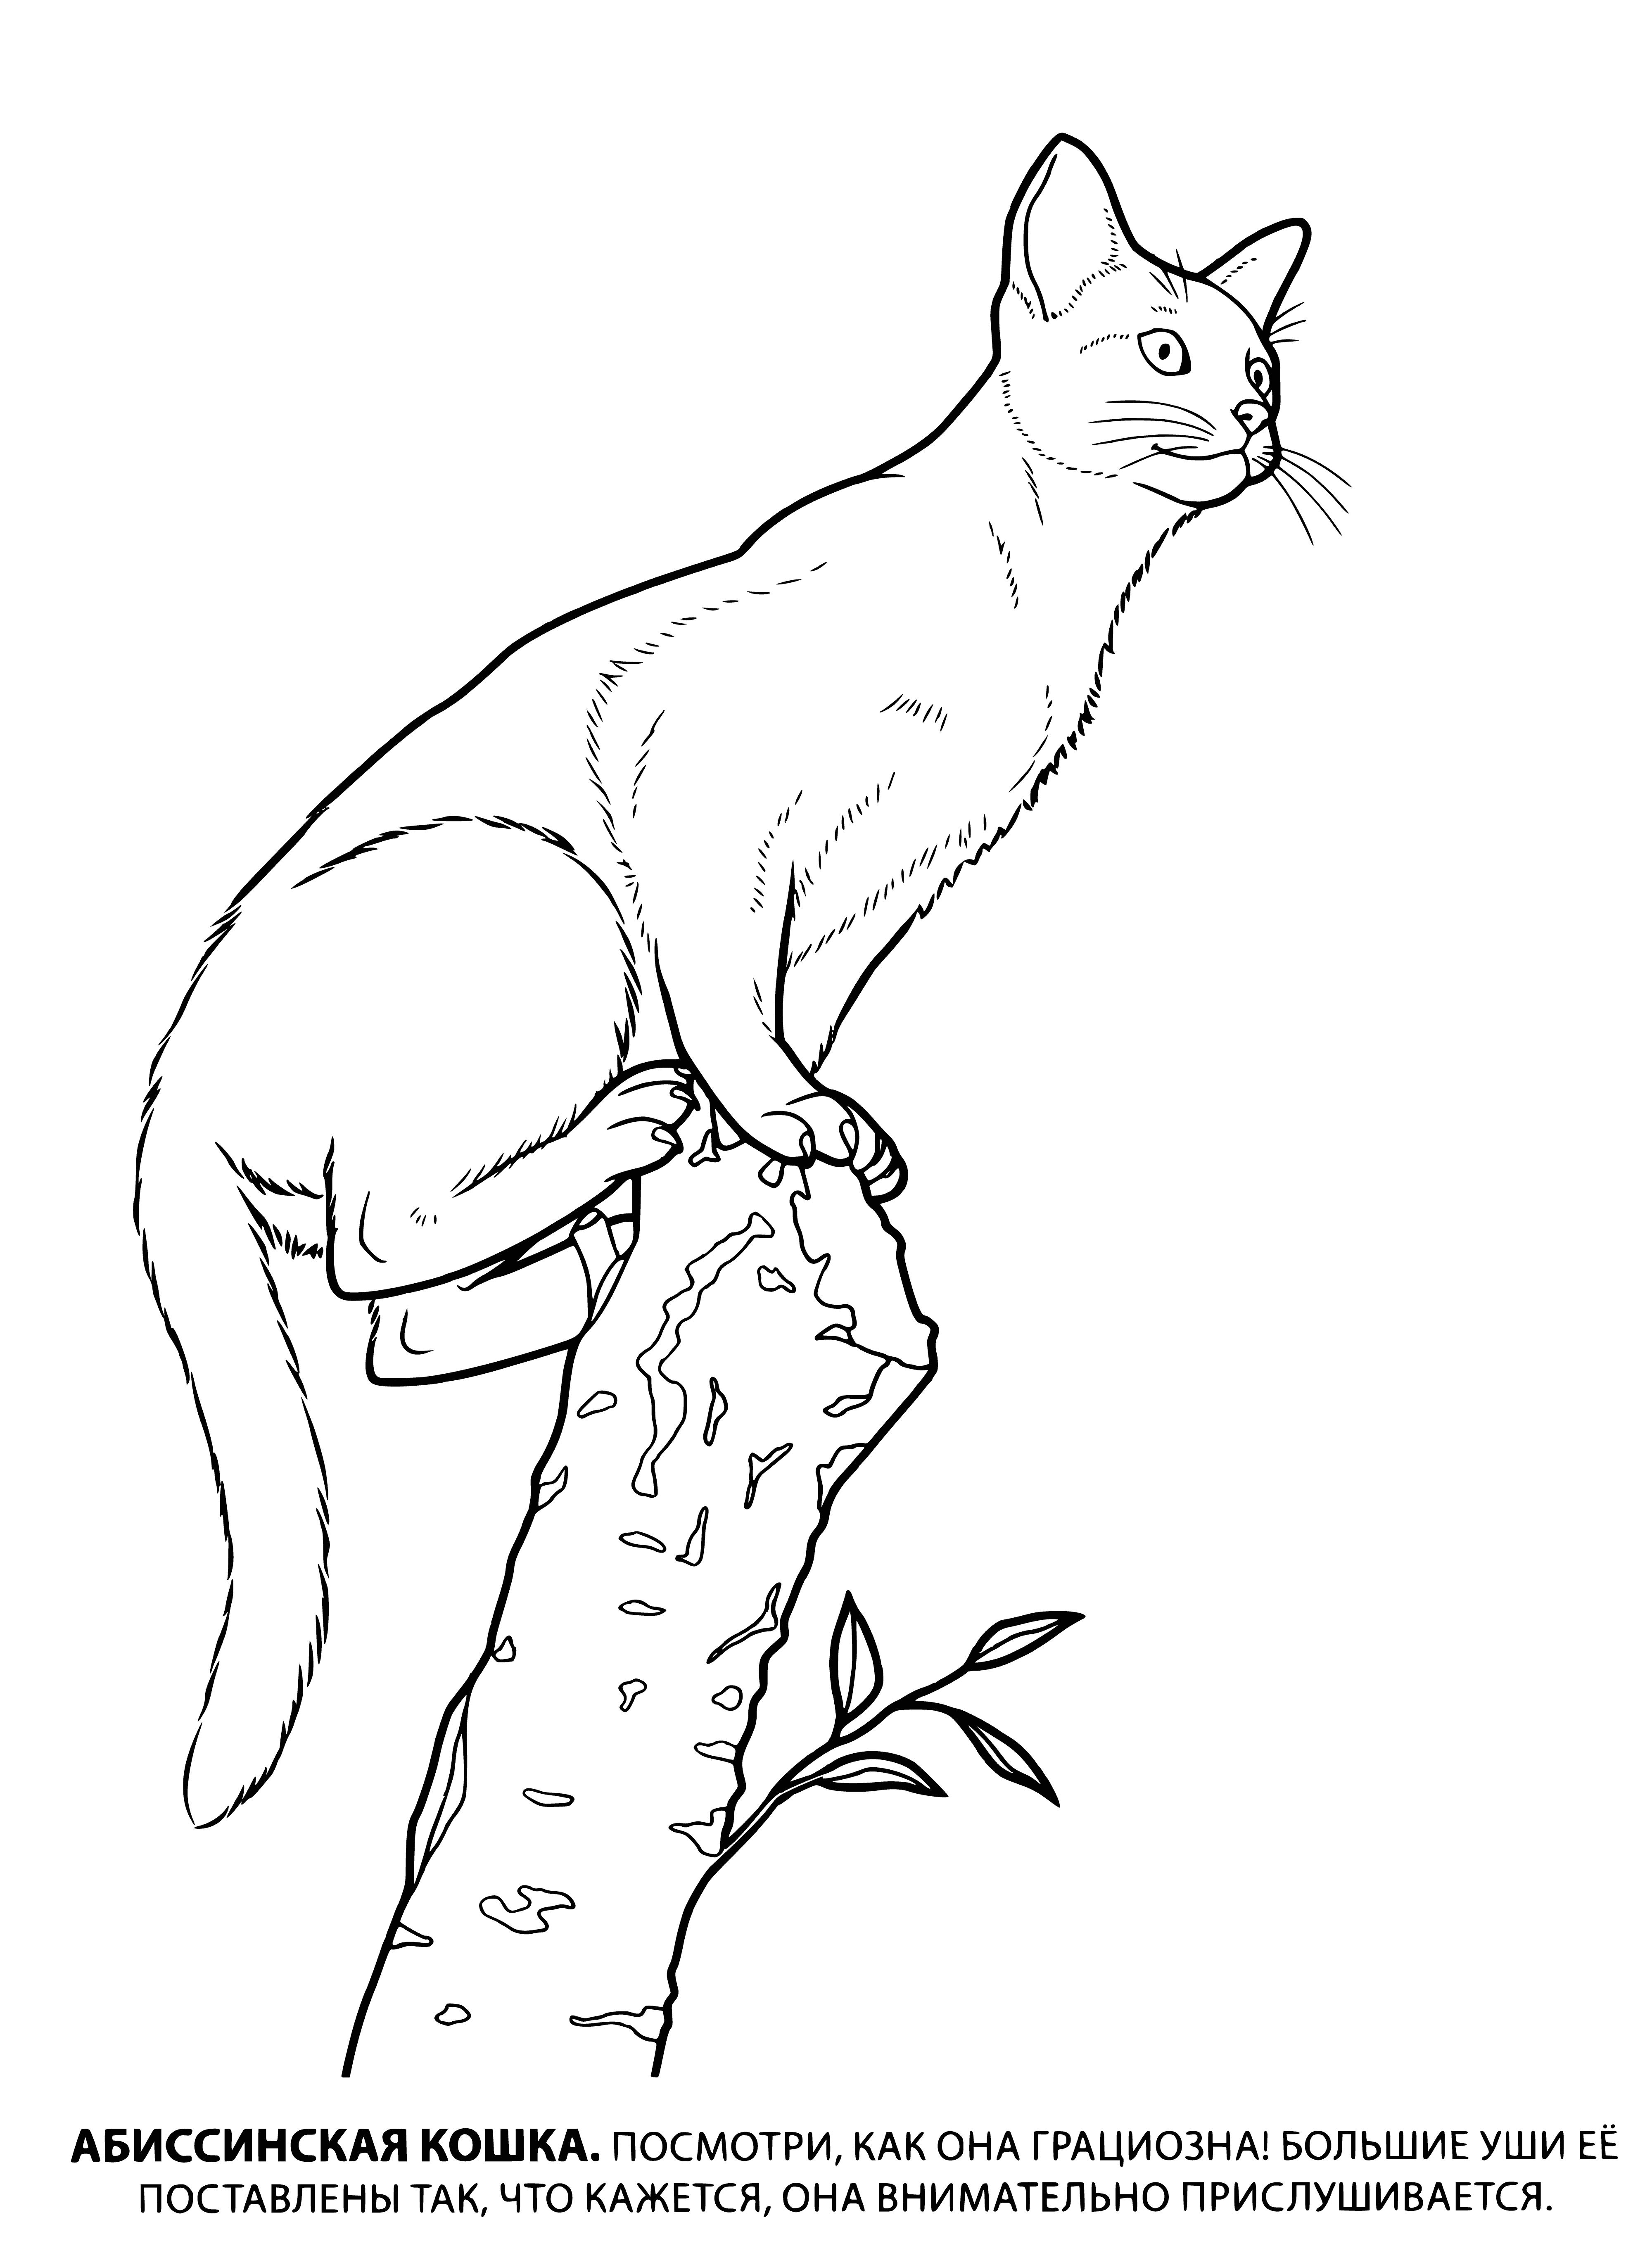 Abyssinian cat coloring page